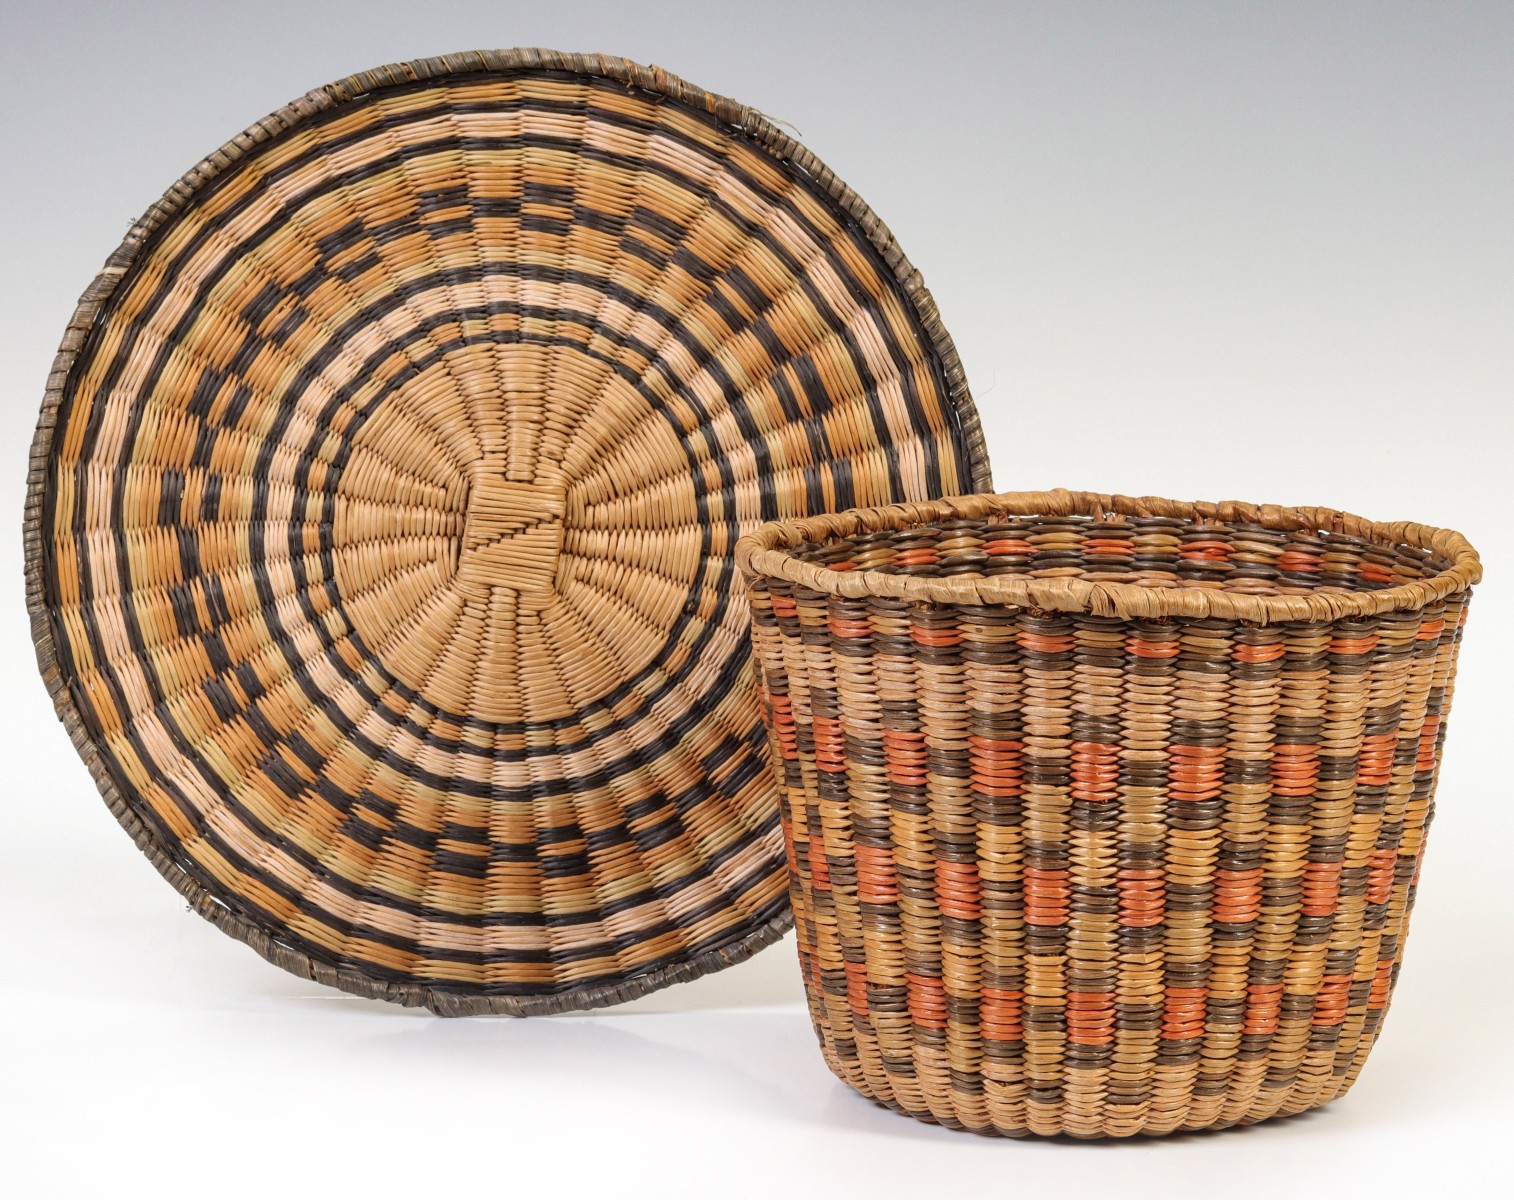 HOPI WICKER PEACH BASKET AND TRAY IN MULTIPLE COLORS